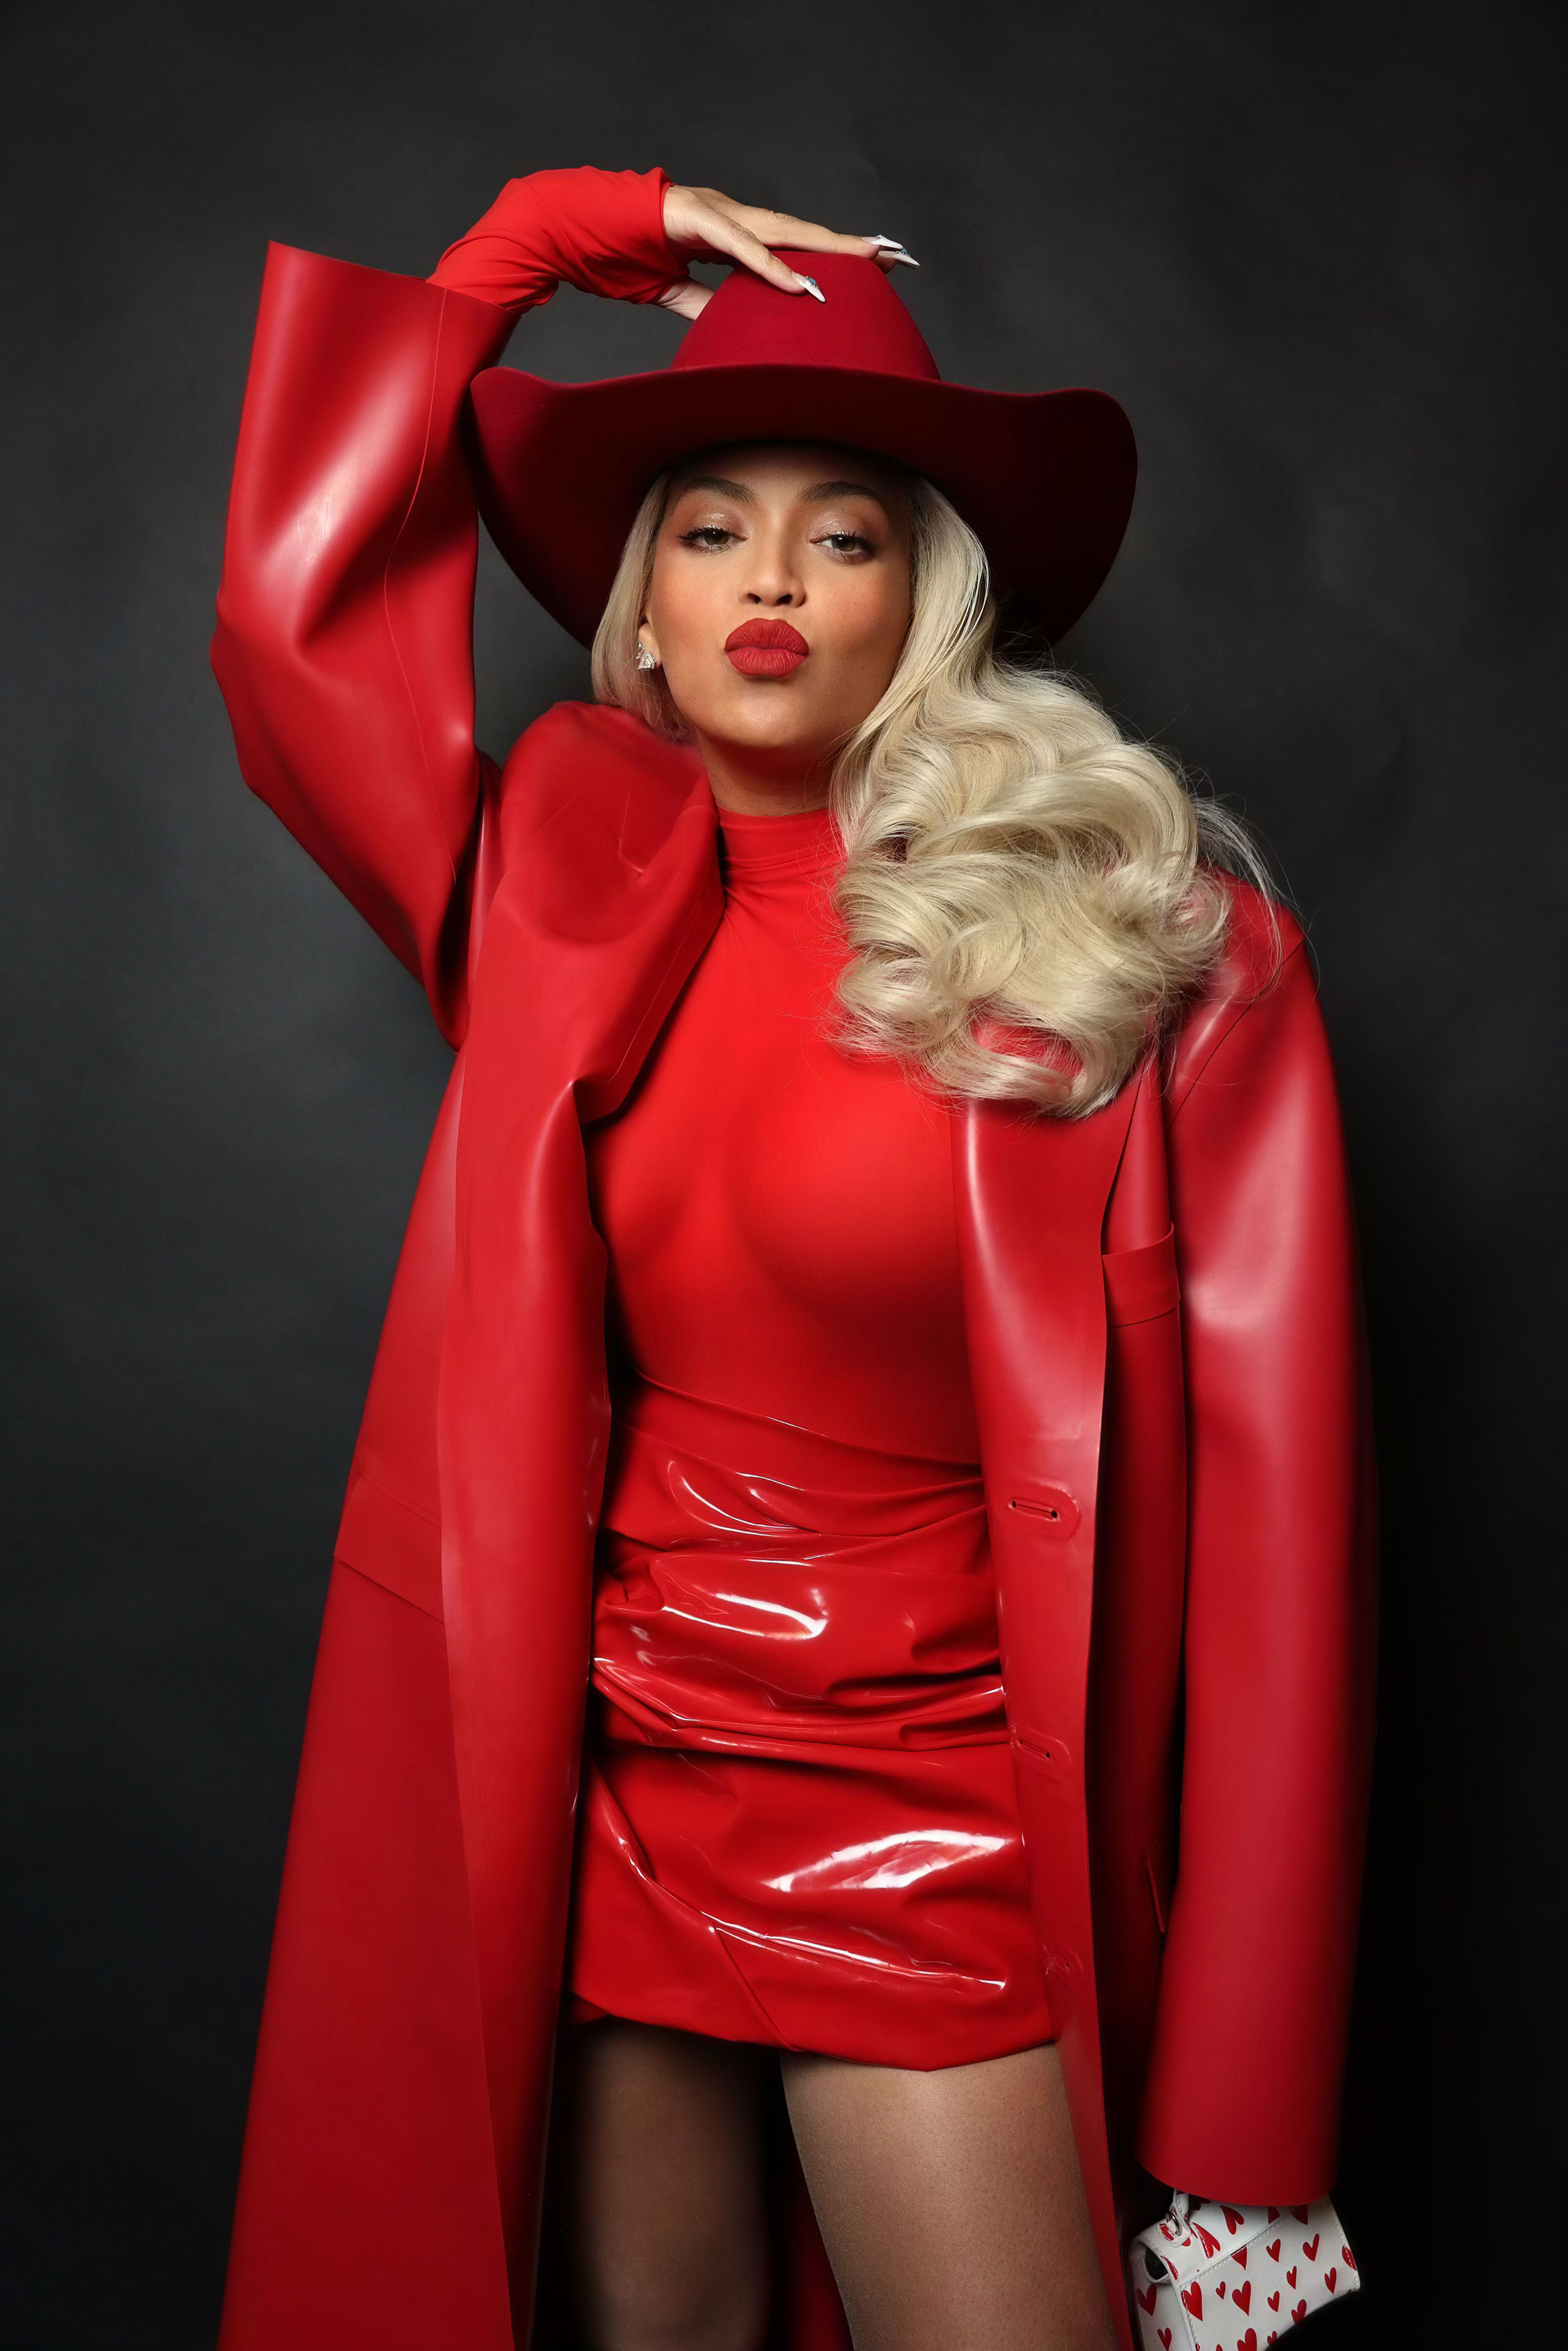 Bey topped off her look with a red velvet cowgirl hat